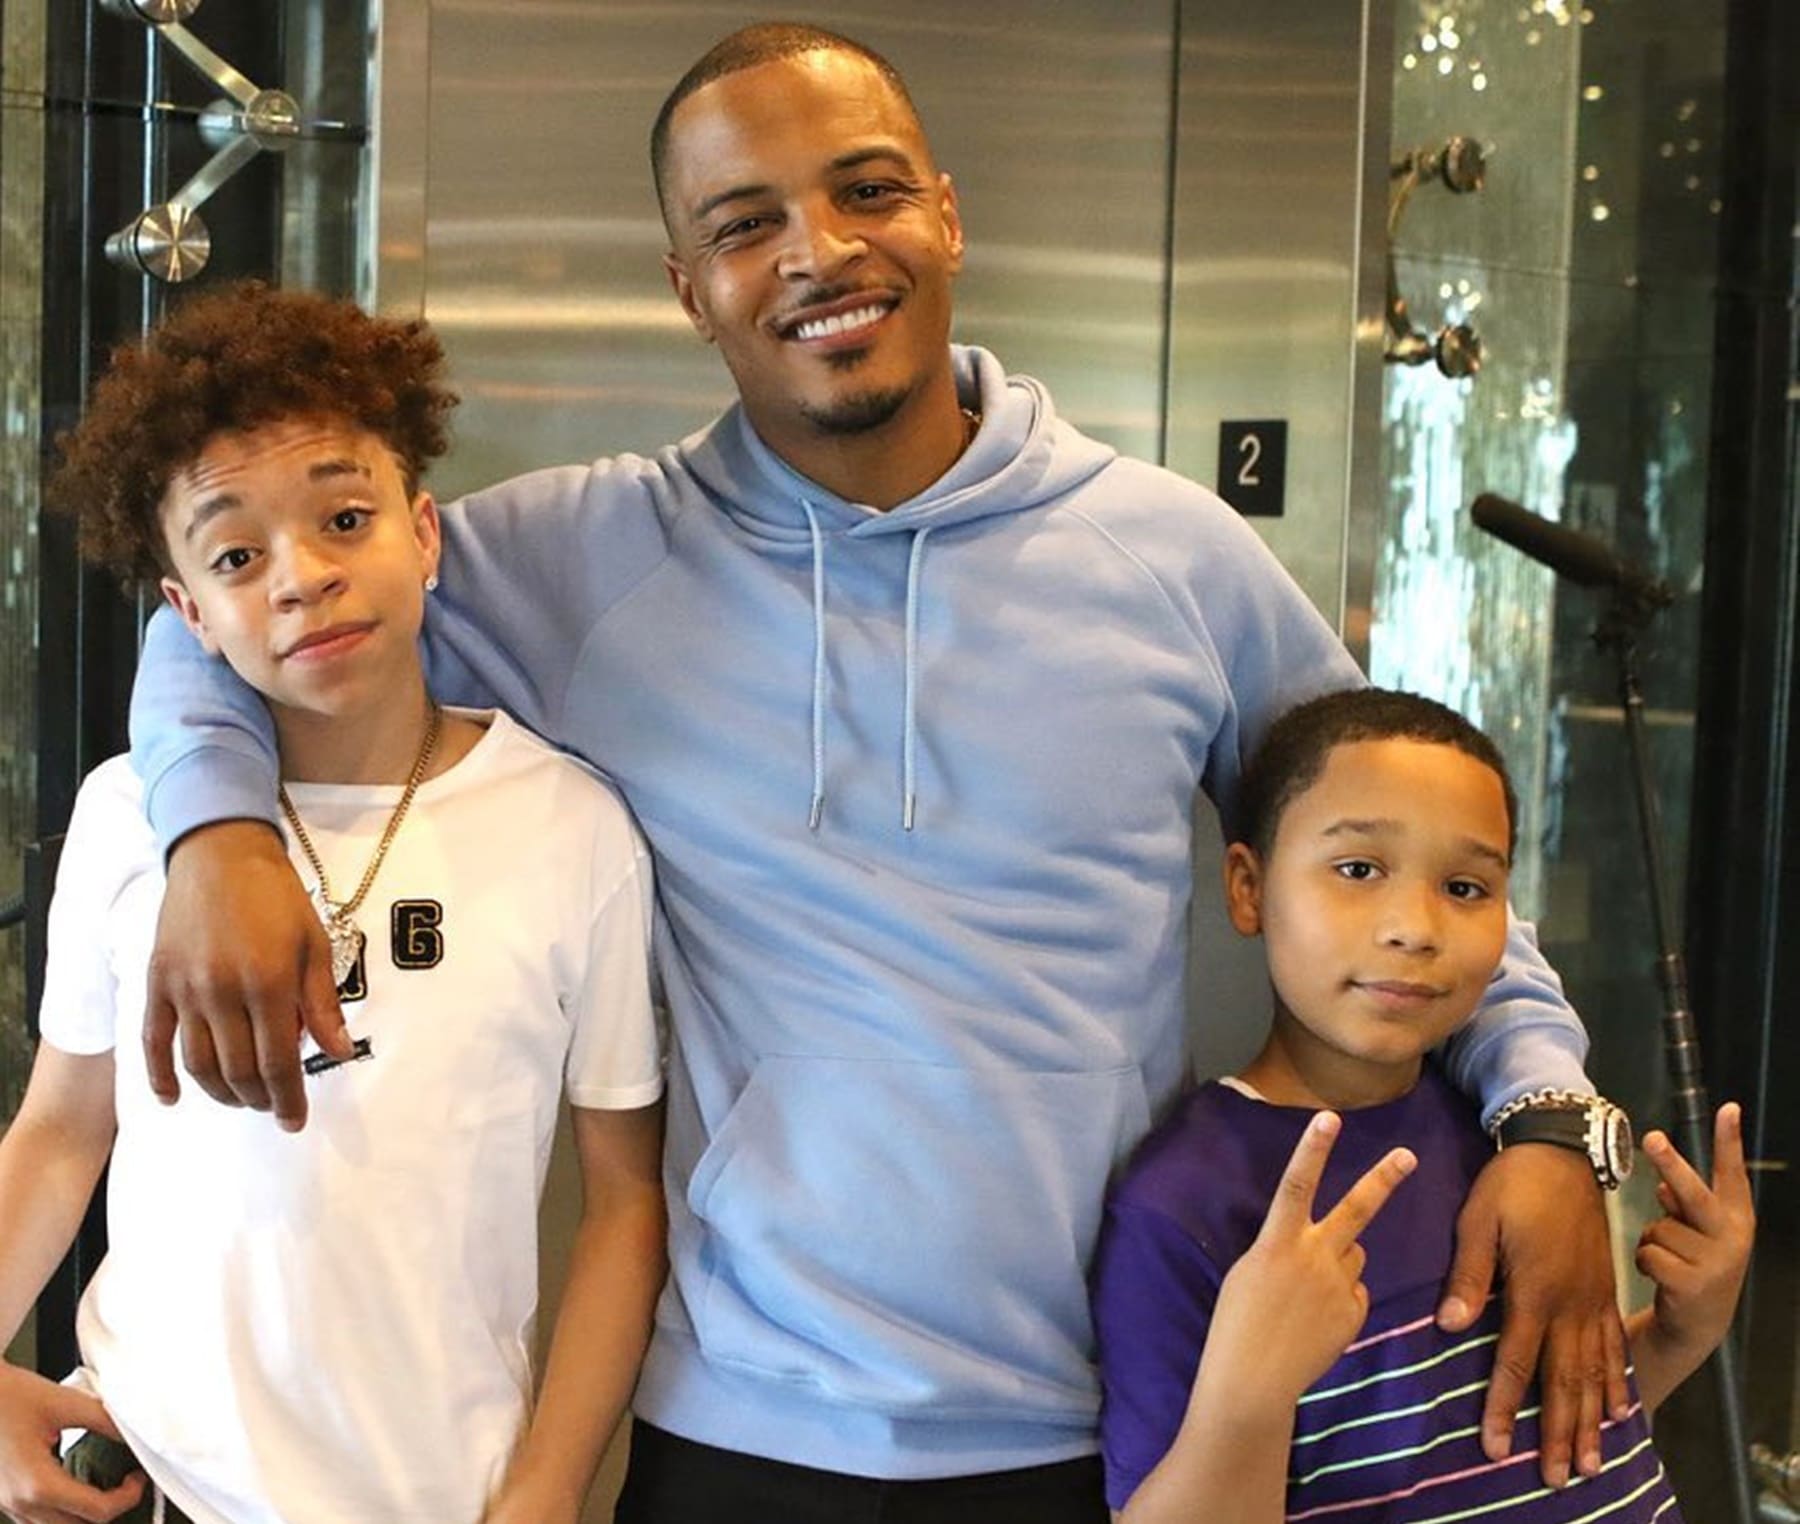 T.I.'s Fans Love His Relationship With His Boys - Check Out These Videos Featuring King And Major